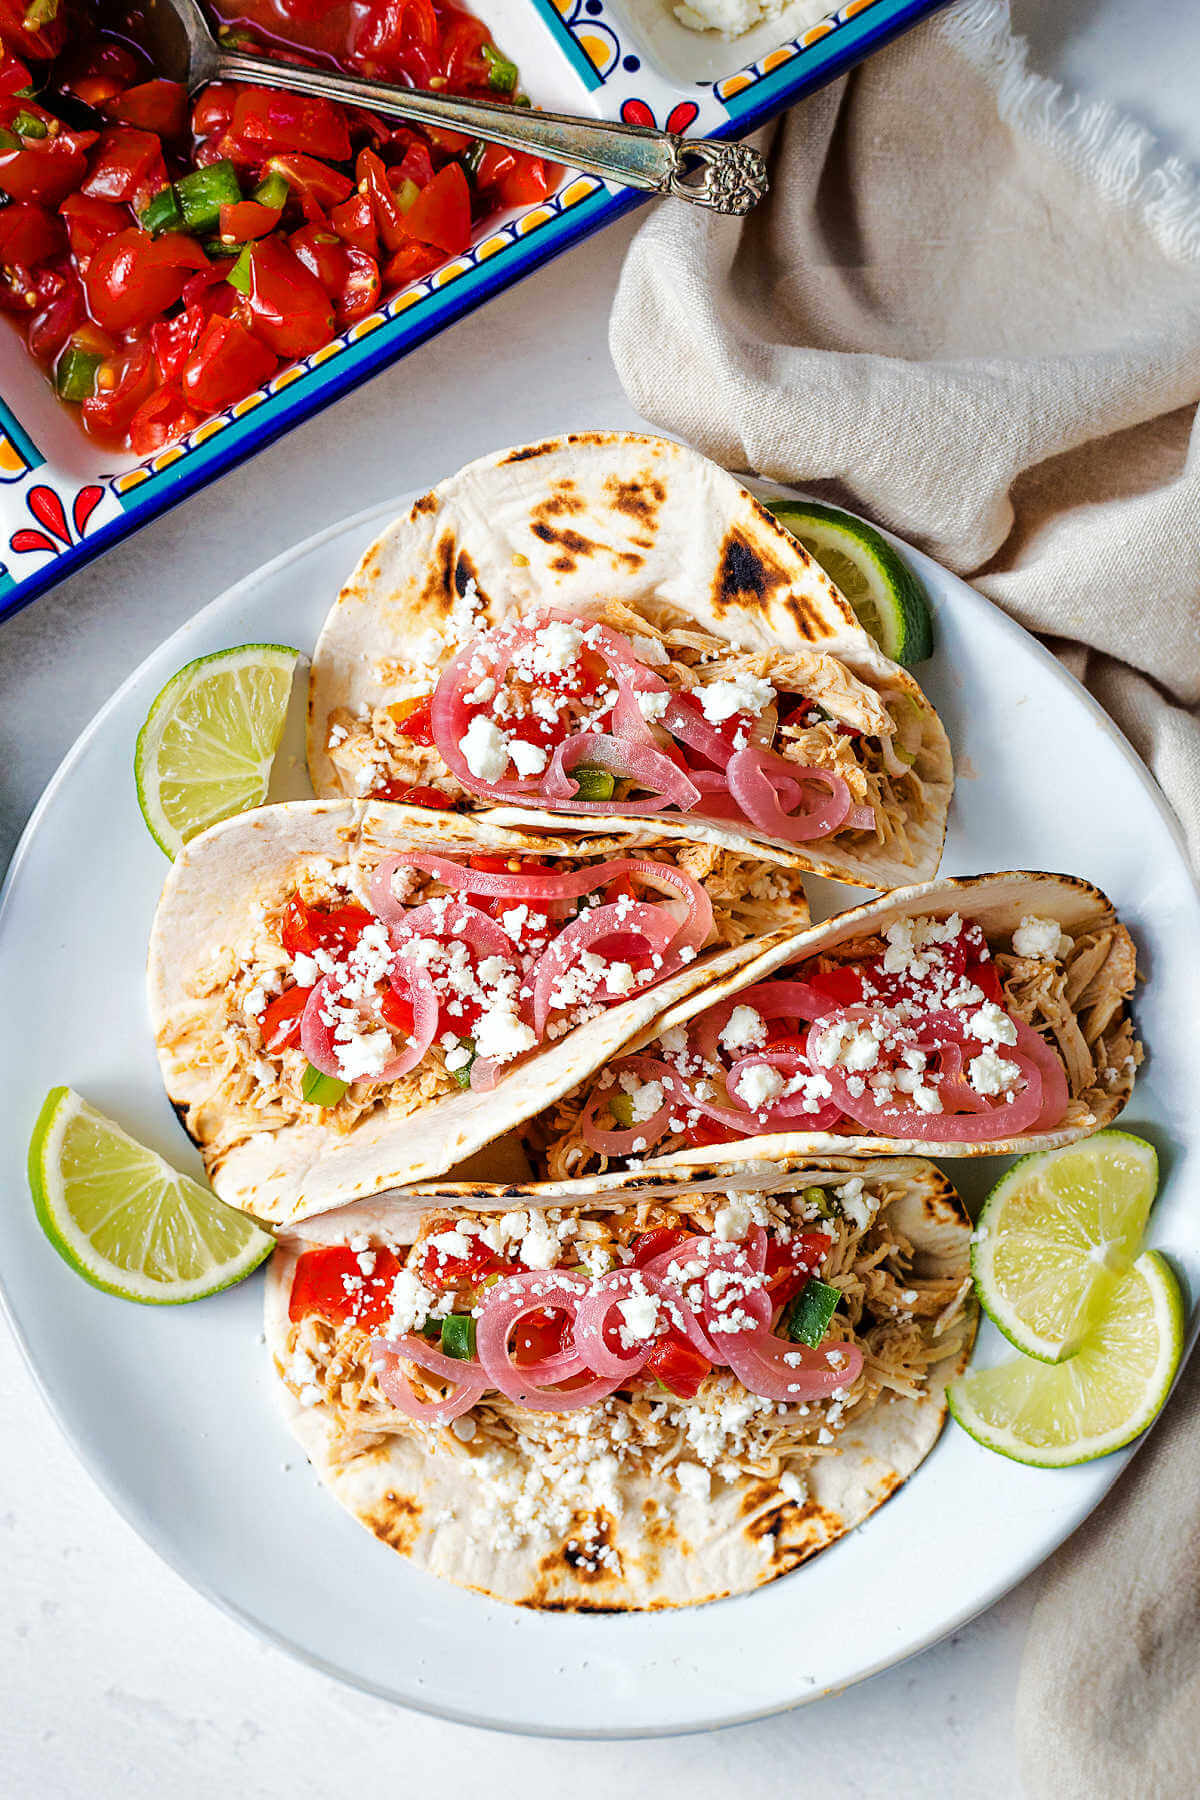 chicken street tacos on a plate garnished with salsa, pickled red onions, feta cheese and lime slices.